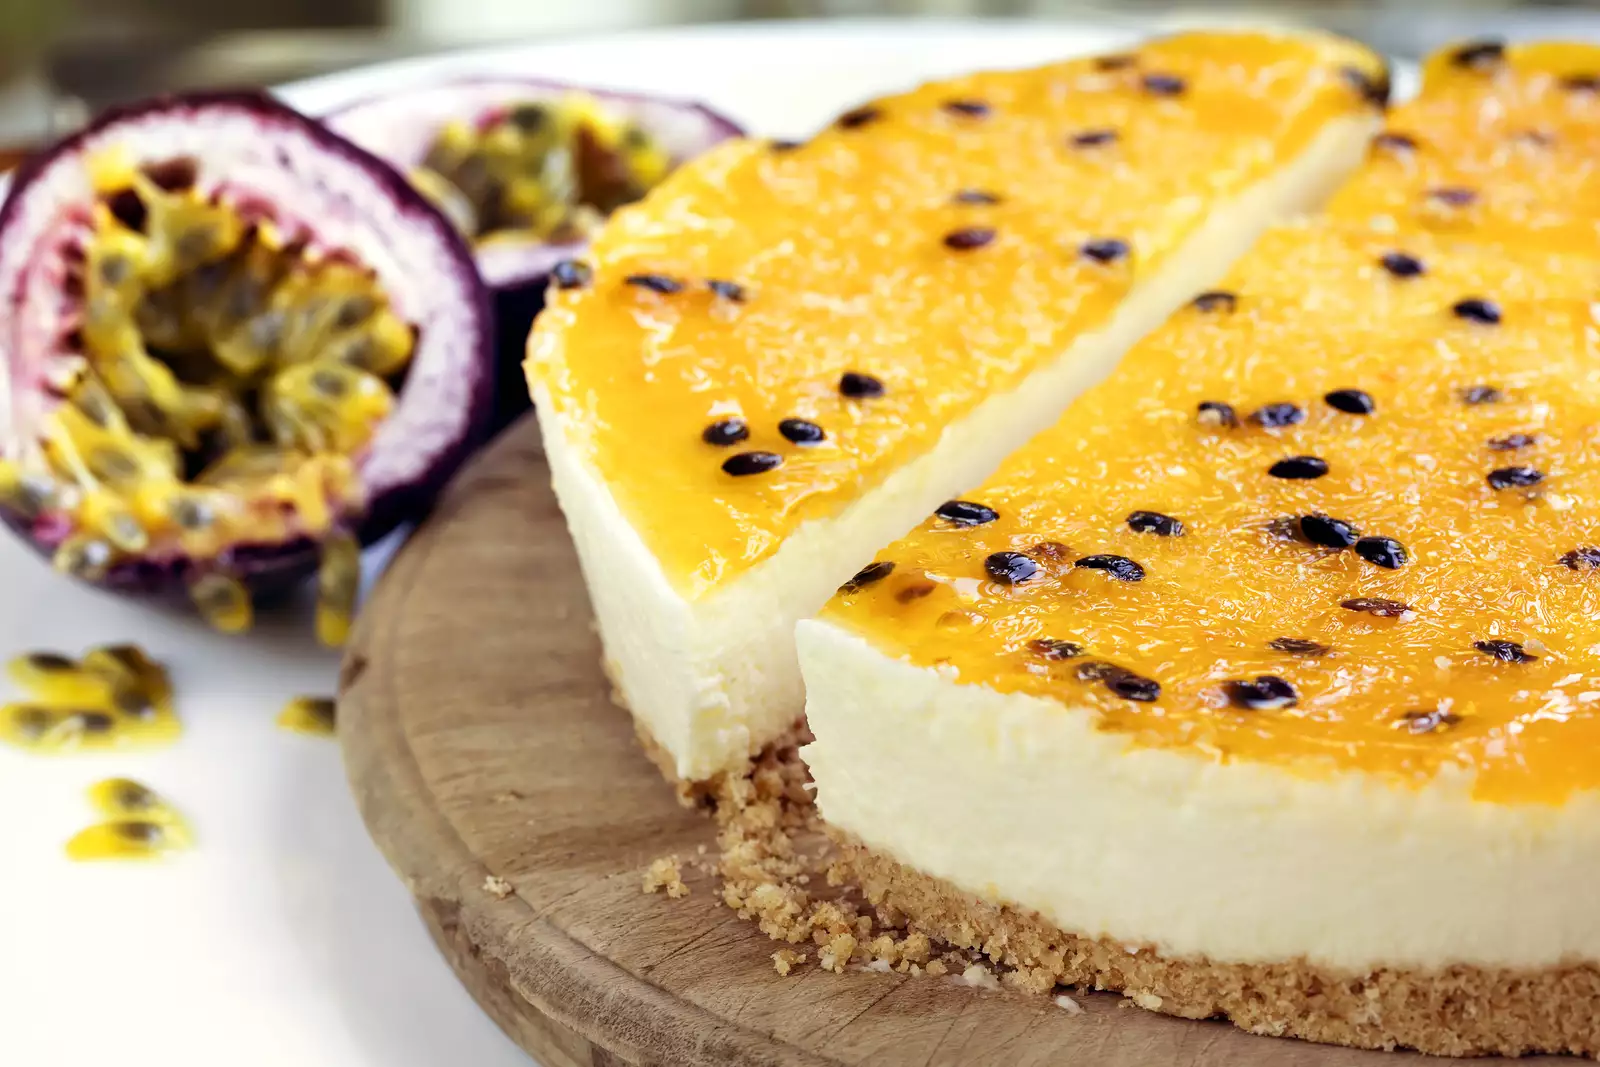 No Bake Passionfruit Jelly Cheesecake | Stay at Home Mum.com.au